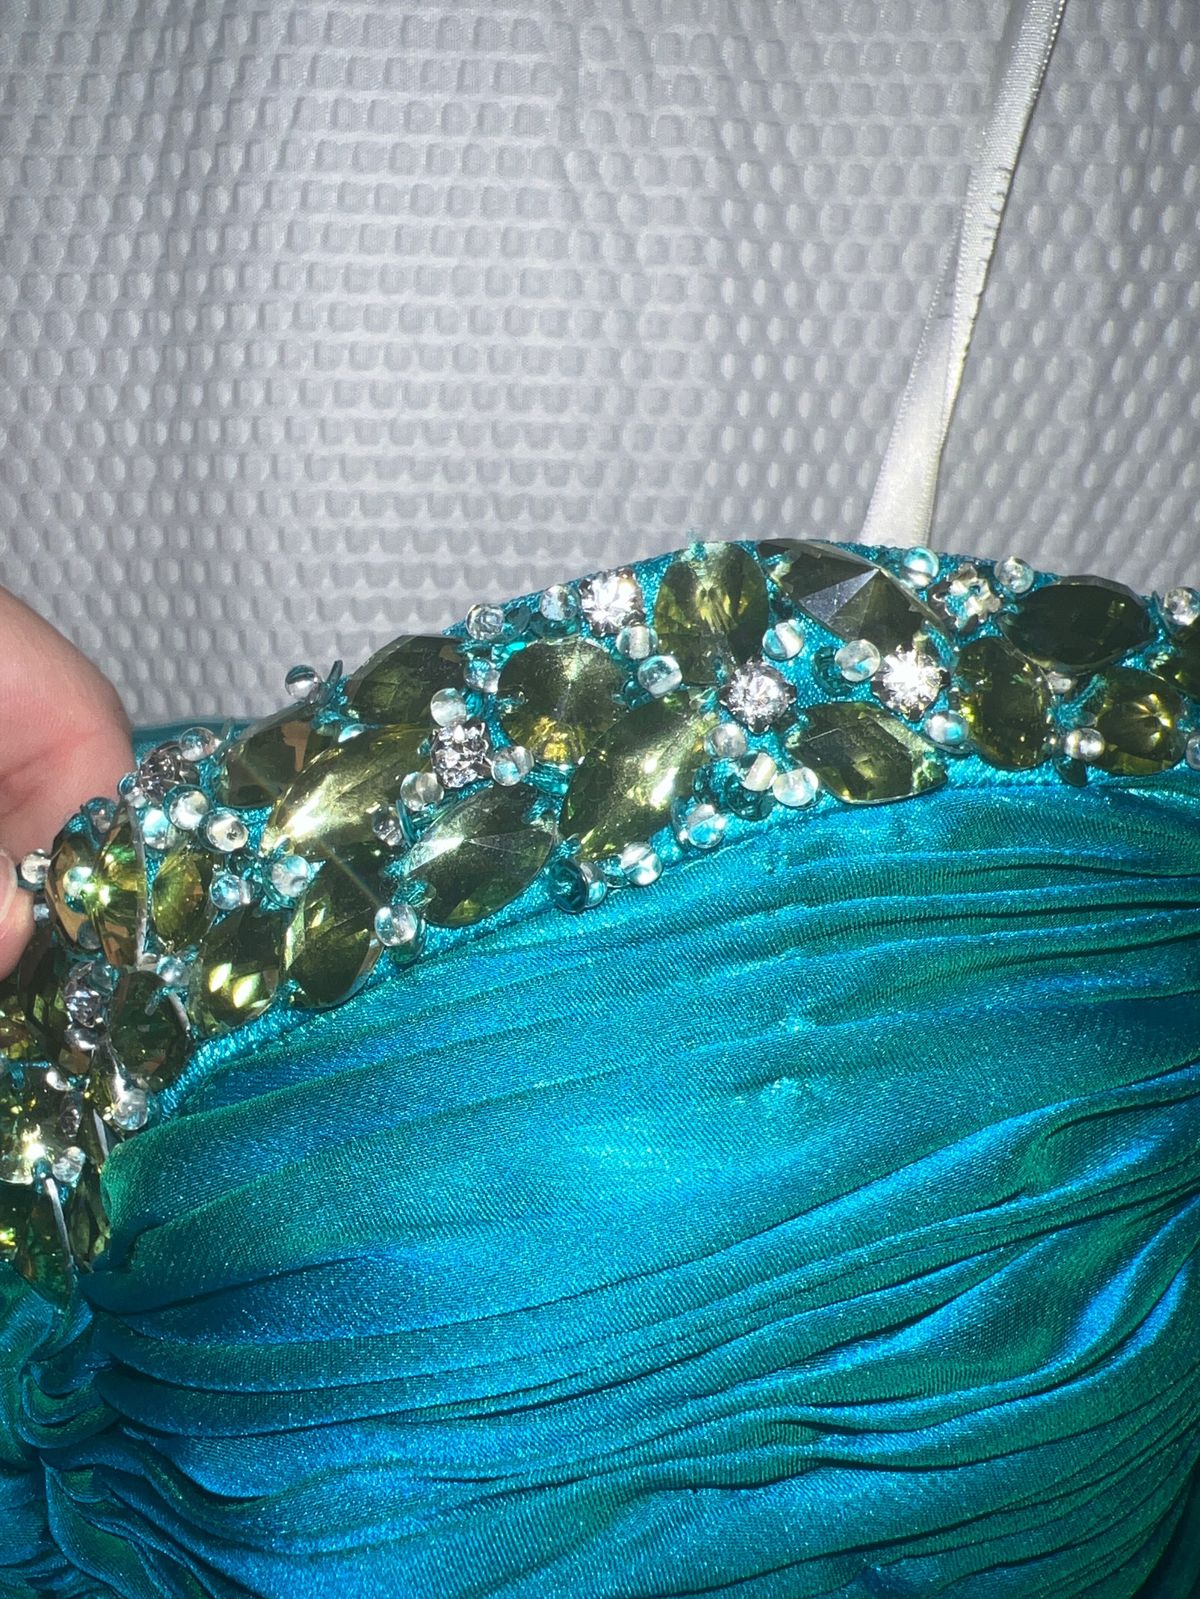 Forever yours Size 4 Prom Strapless Sequined Blue A-line Dress on Queenly